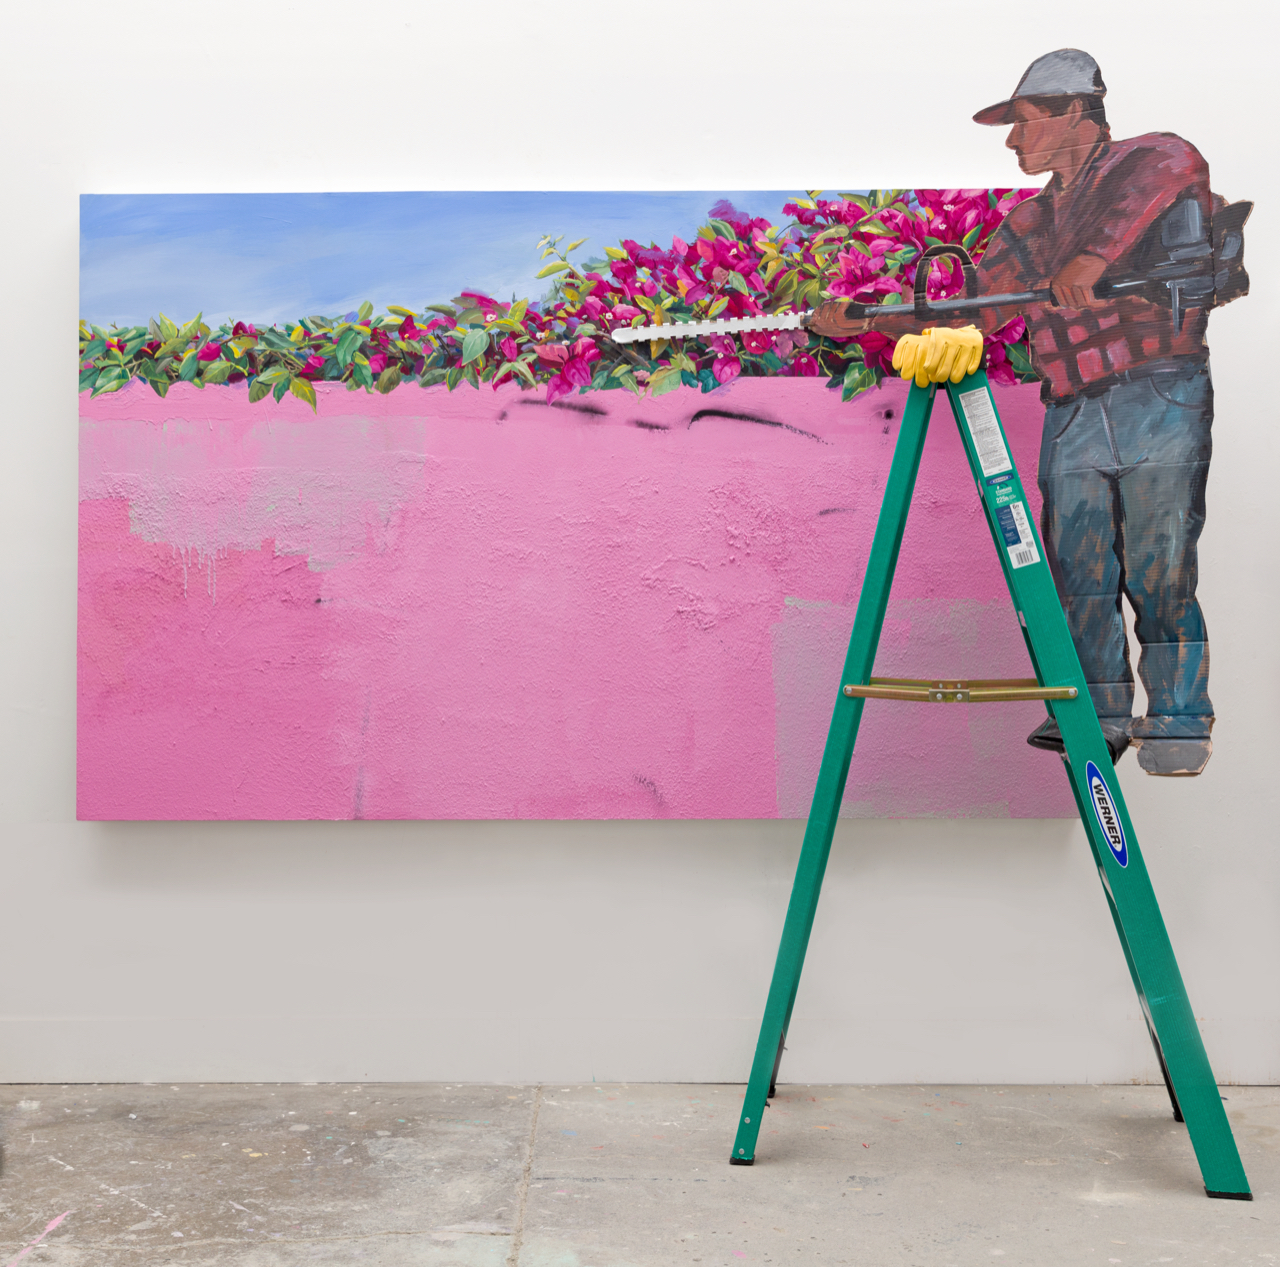 Image of Patrick Martinez and Jay Lynn Gomez multimedia piece "Against the Wall," which portrays a man on a ladder with a hedge trimmer, trimming pink flowers. The backdrop is a clear blue sky and below the hedge is filled in pink 